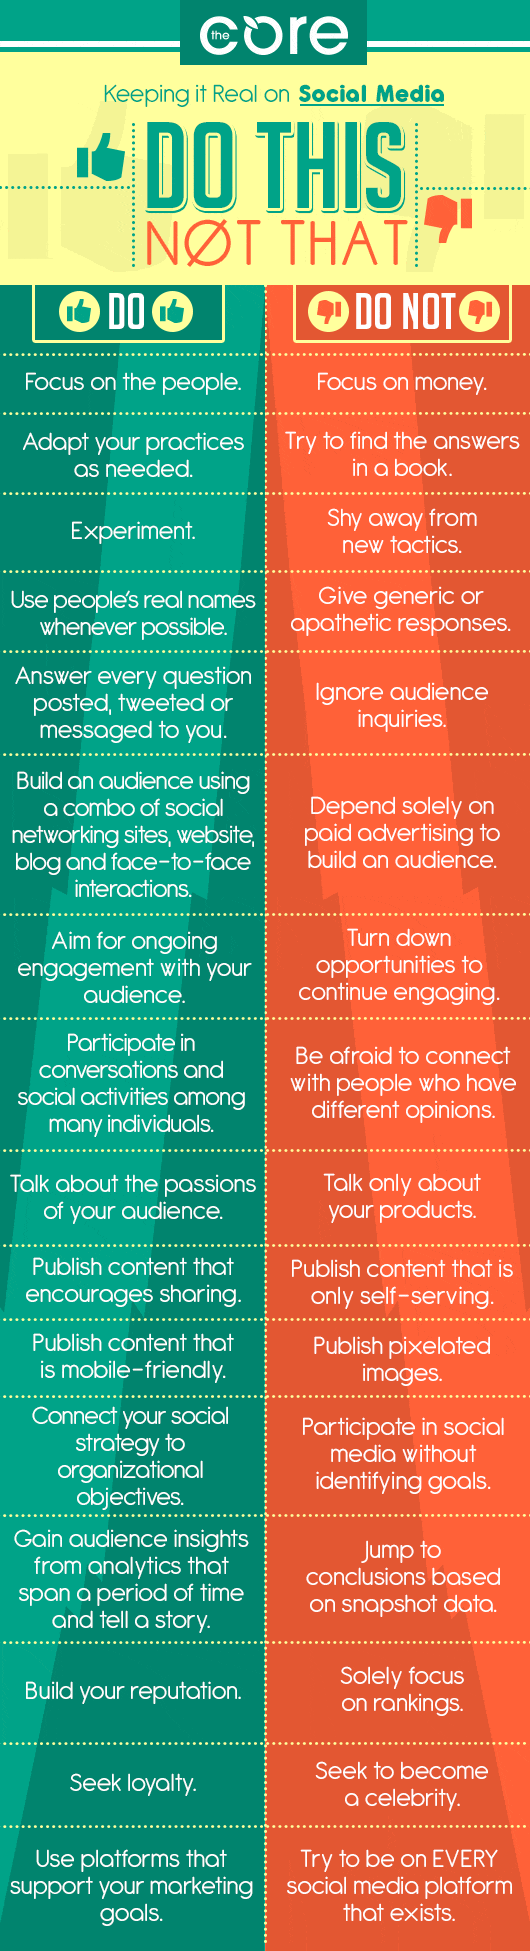 This is an infographic that tells you what to do and what not to do to build relationships online.